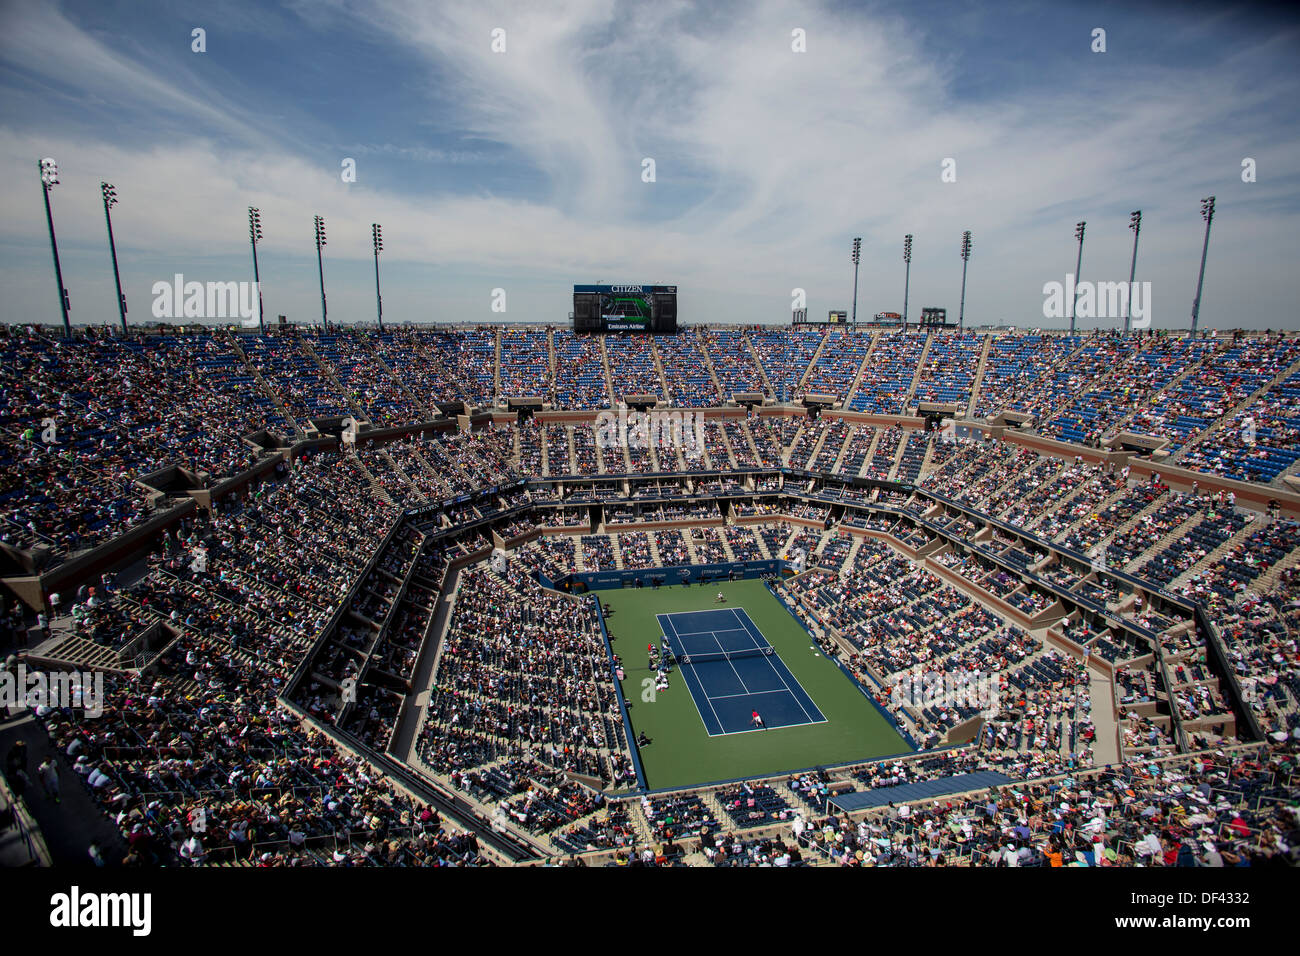 Arthur Ashe Stadium at the Billie Jean King National Tennis Center during the 2013 US Open Tennis Championships Stock Photo